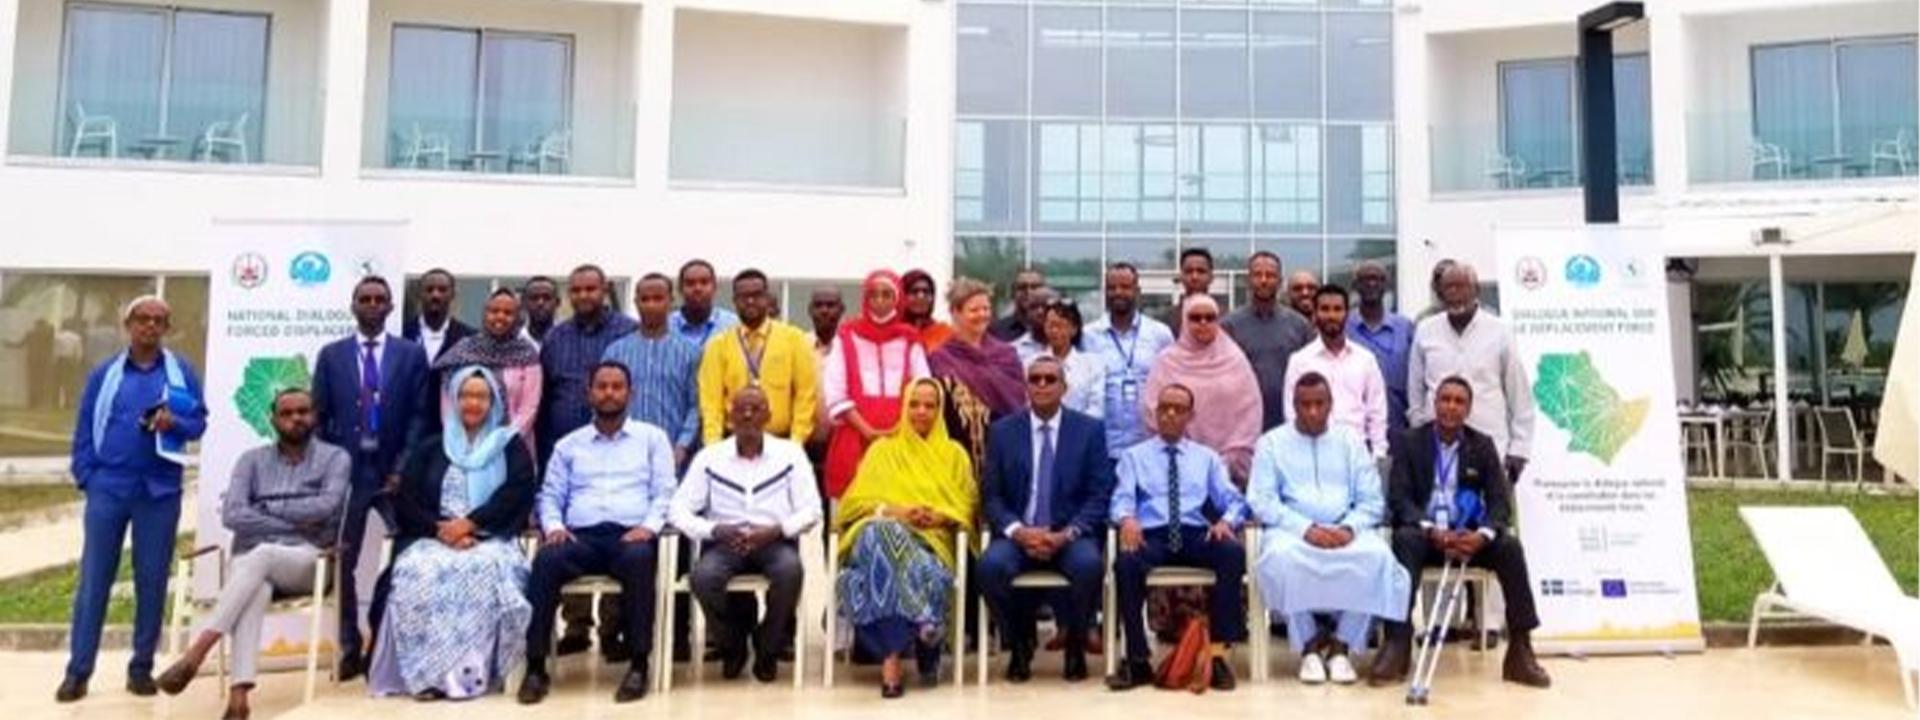 IGAD Conducts a Djibouti National Dialogue on Forced Displacement